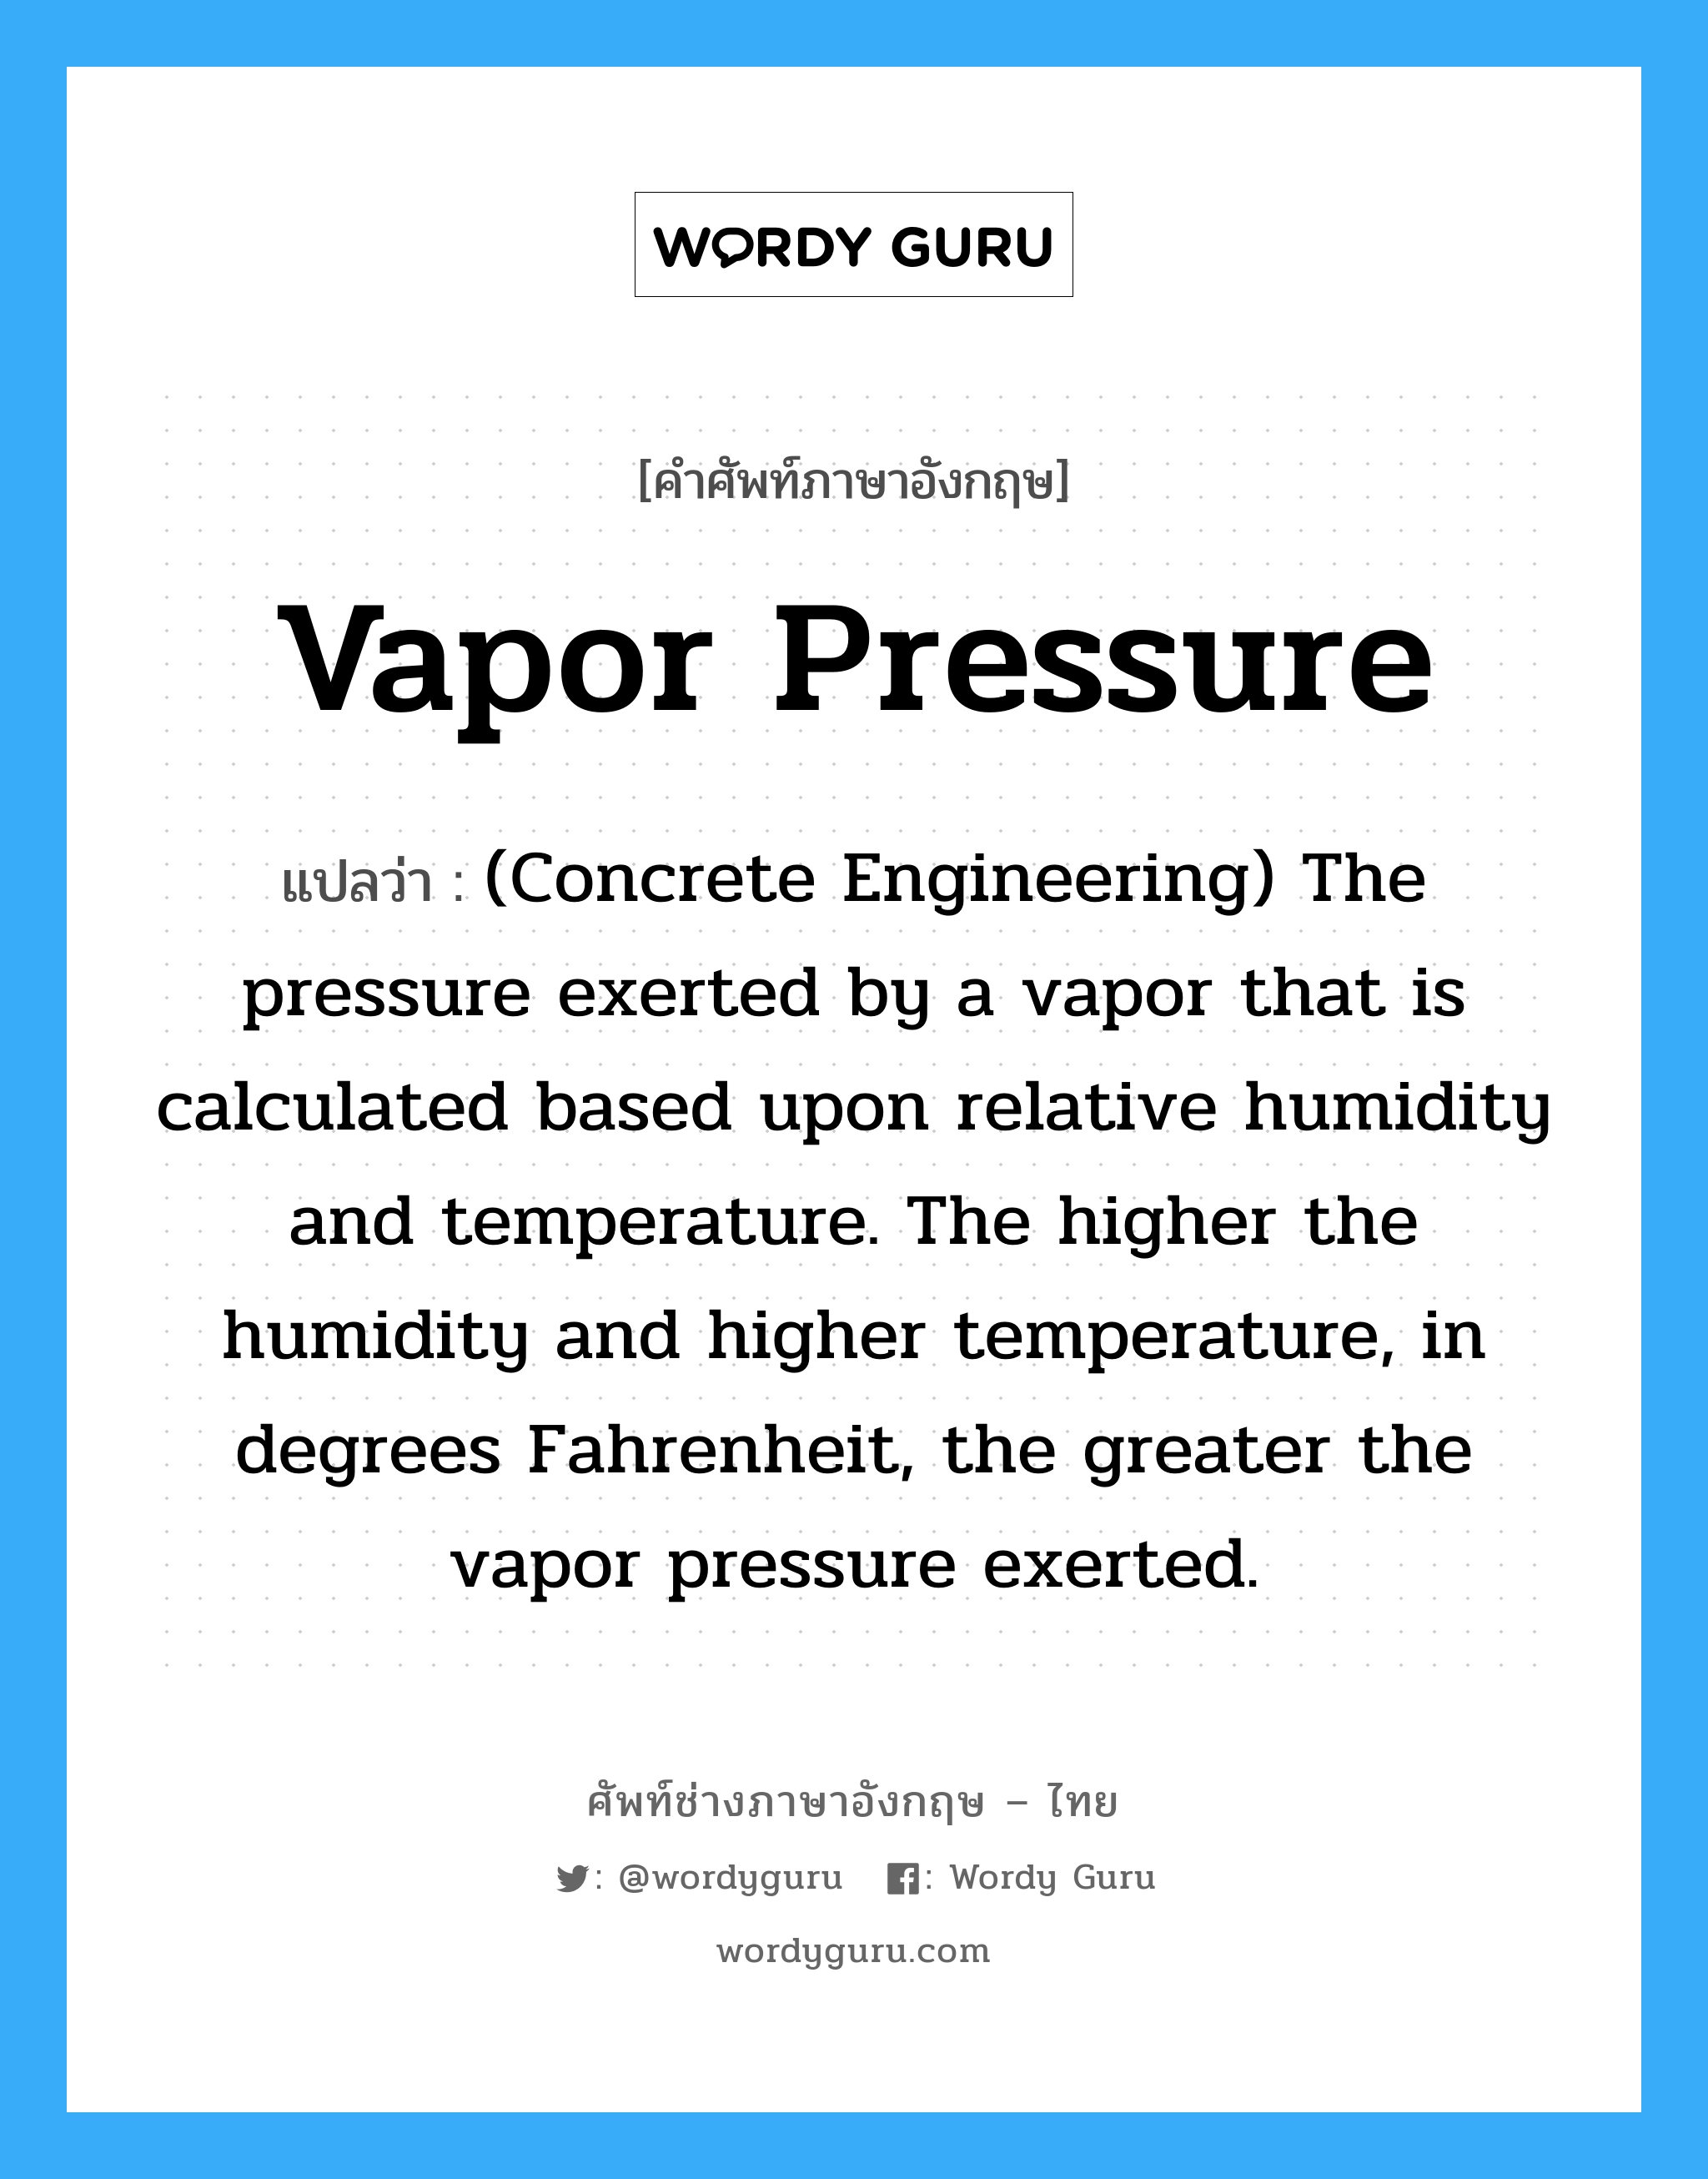 (Concrete Engineering) The pressure exerted by a vapor that is calculated based upon relative humidity and temperature. The higher the humidity and higher temperature, in degrees Fahrenheit, the greater the vapor pressure exerted. ภาษาอังกฤษ?, คำศัพท์ช่างภาษาอังกฤษ - ไทย (Concrete Engineering) The pressure exerted by a vapor that is calculated based upon relative humidity and temperature. The higher the humidity and higher temperature, in degrees Fahrenheit, the greater the vapor pressure exerted. คำศัพท์ภาษาอังกฤษ (Concrete Engineering) The pressure exerted by a vapor that is calculated based upon relative humidity and temperature. The higher the humidity and higher temperature, in degrees Fahrenheit, the greater the vapor pressure exerted. แปลว่า Vapor Pressure